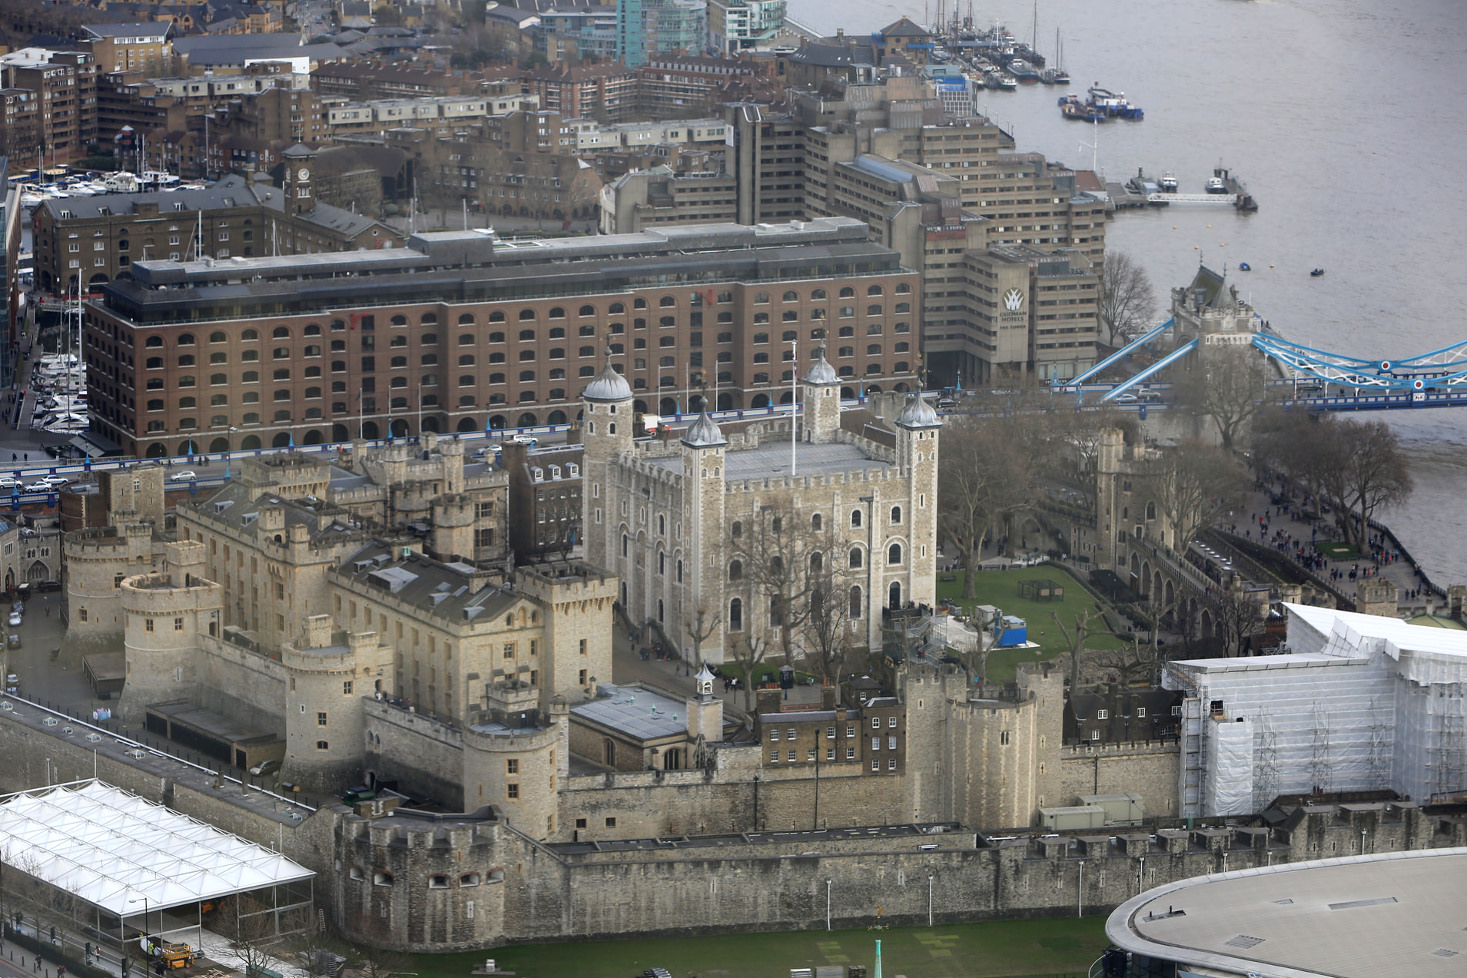 The Tower of London: medieval history in the modern city. Image by Eugene Regis / CC BY 2.0